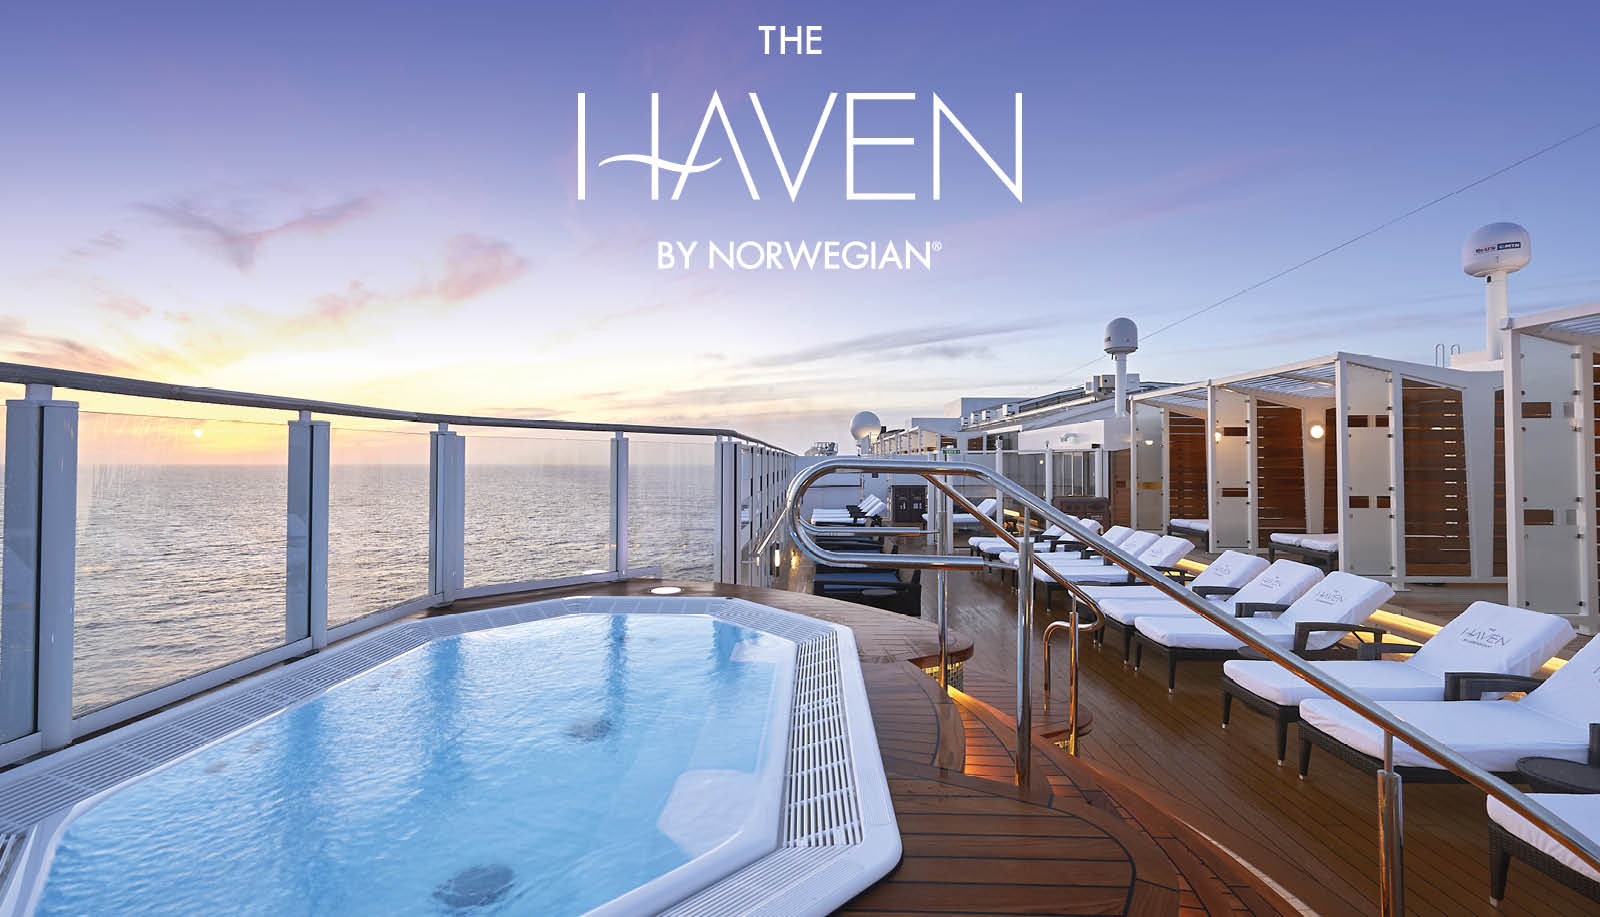 The Haven, by Norwegian Cruise Line